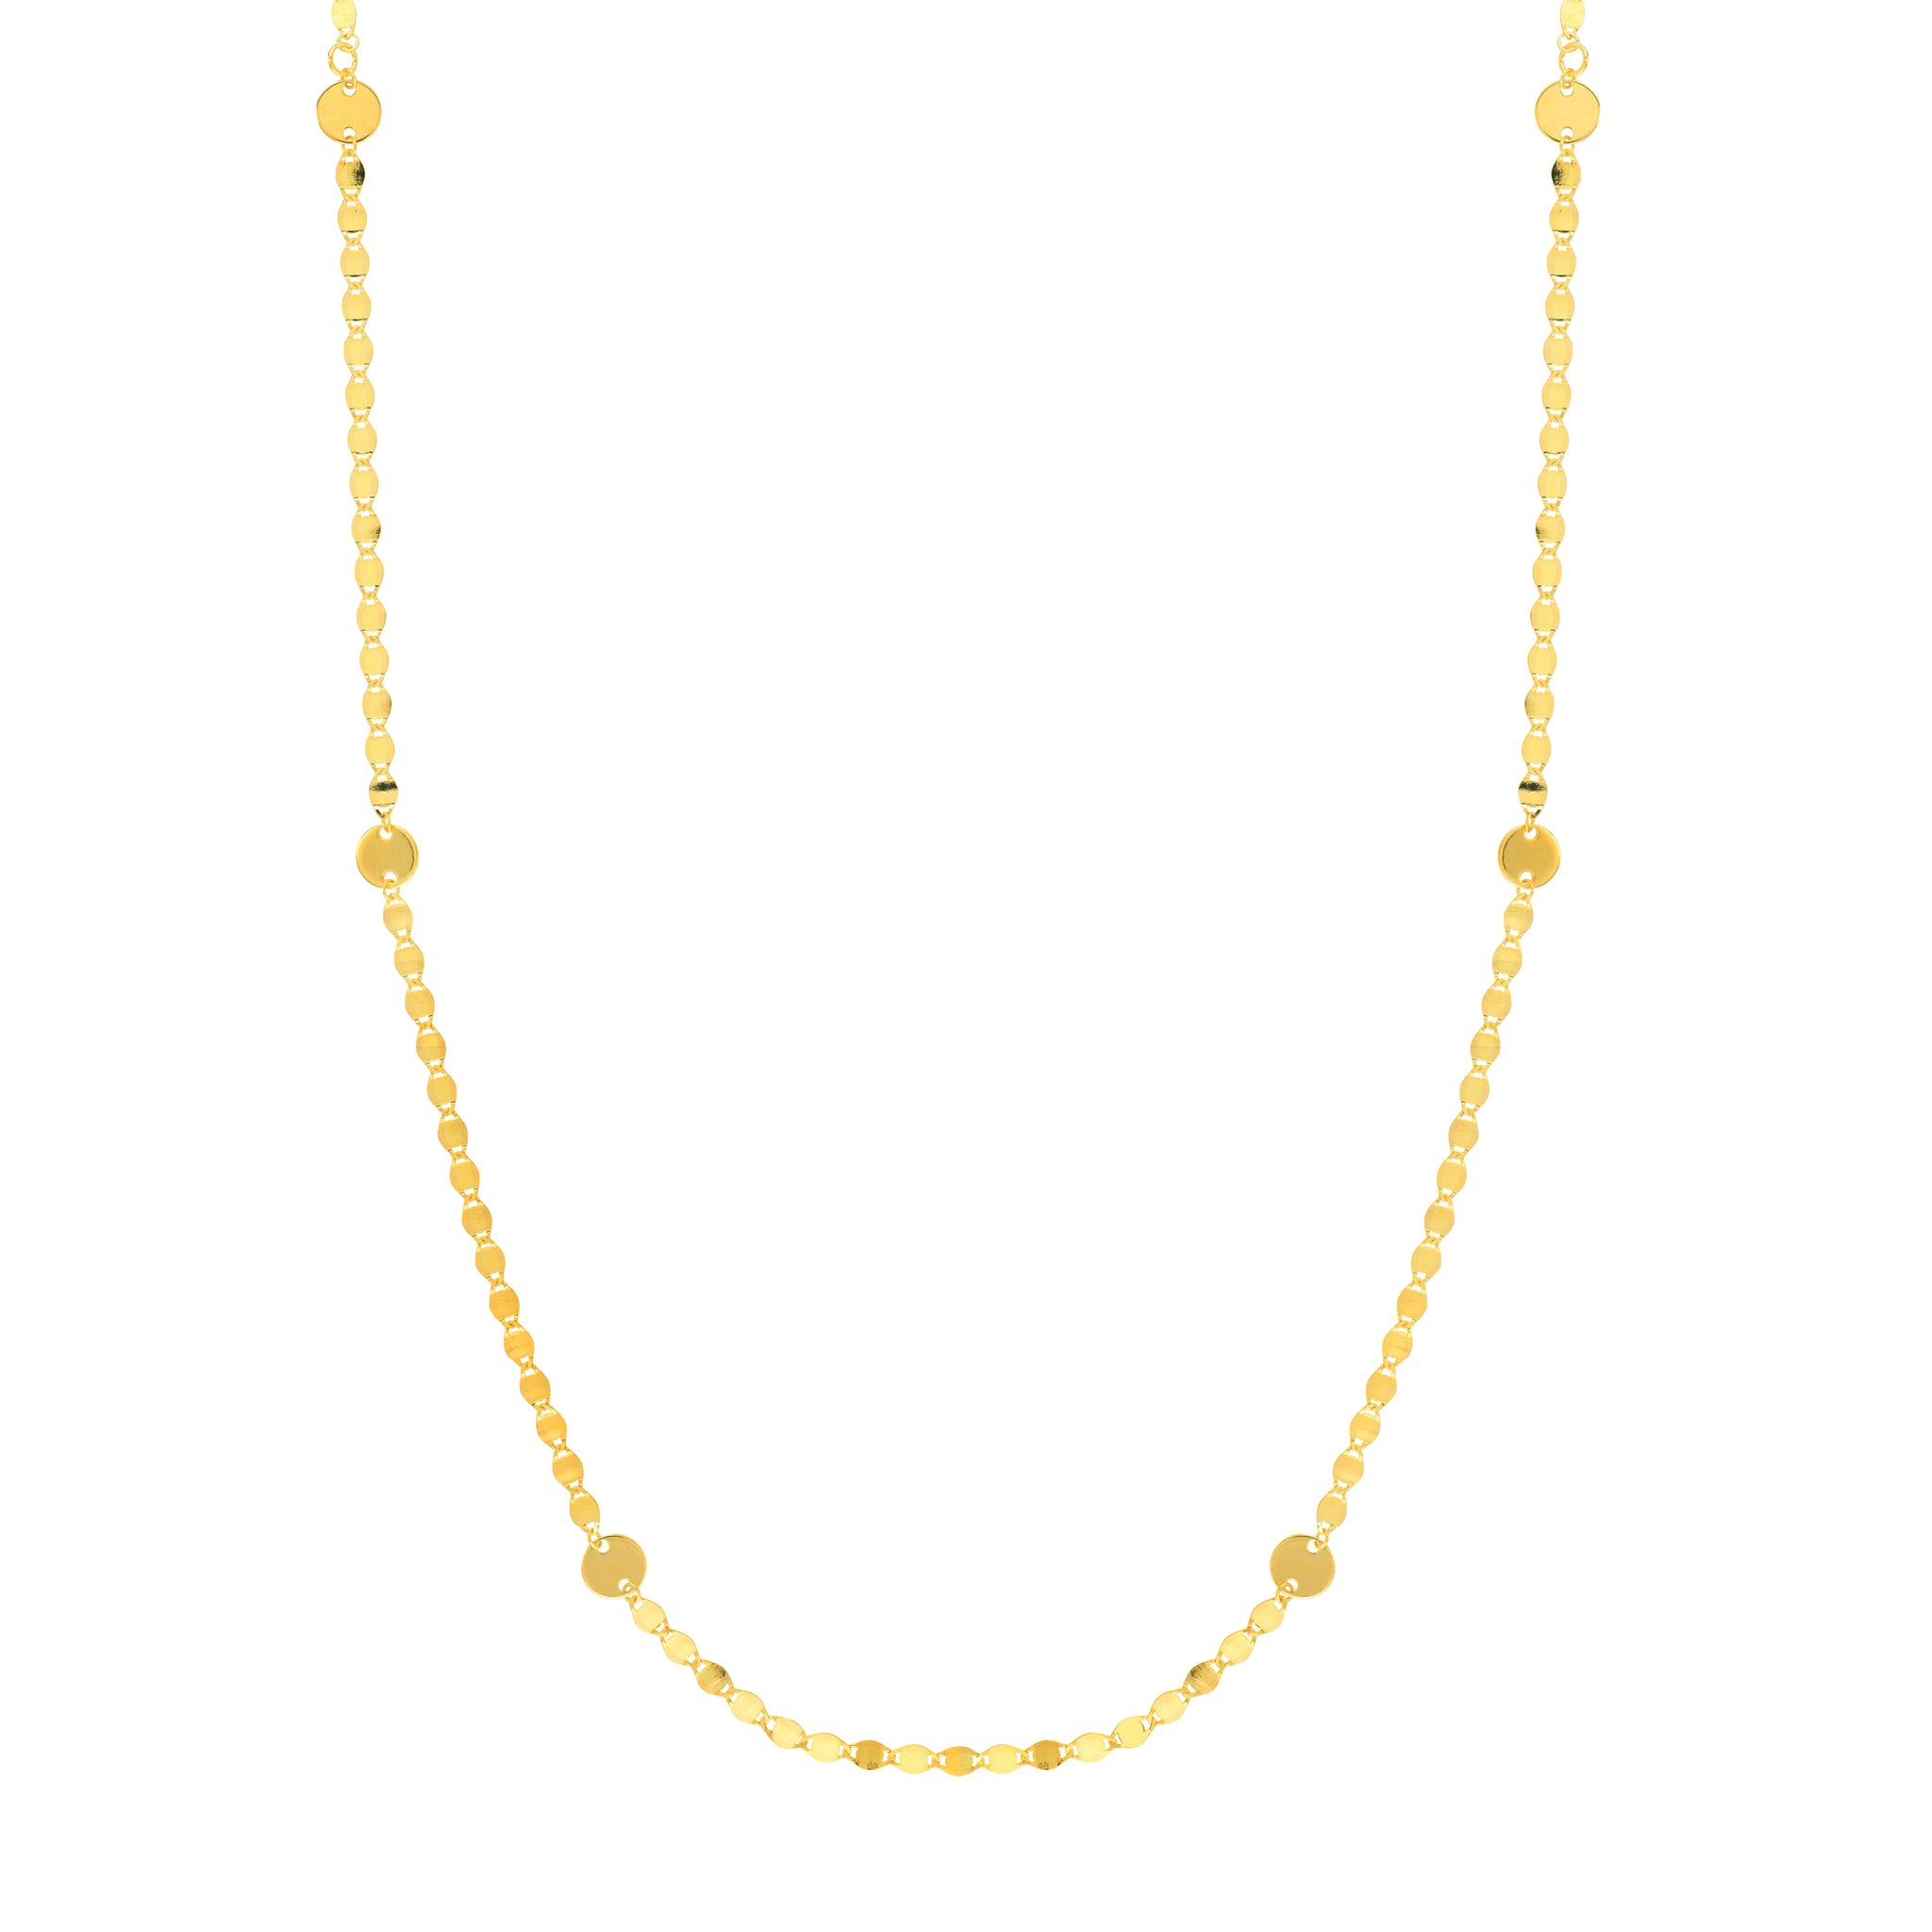 Hemsleys Collection 14K Yellow Gold Valentino Link with Round Discs Necklace